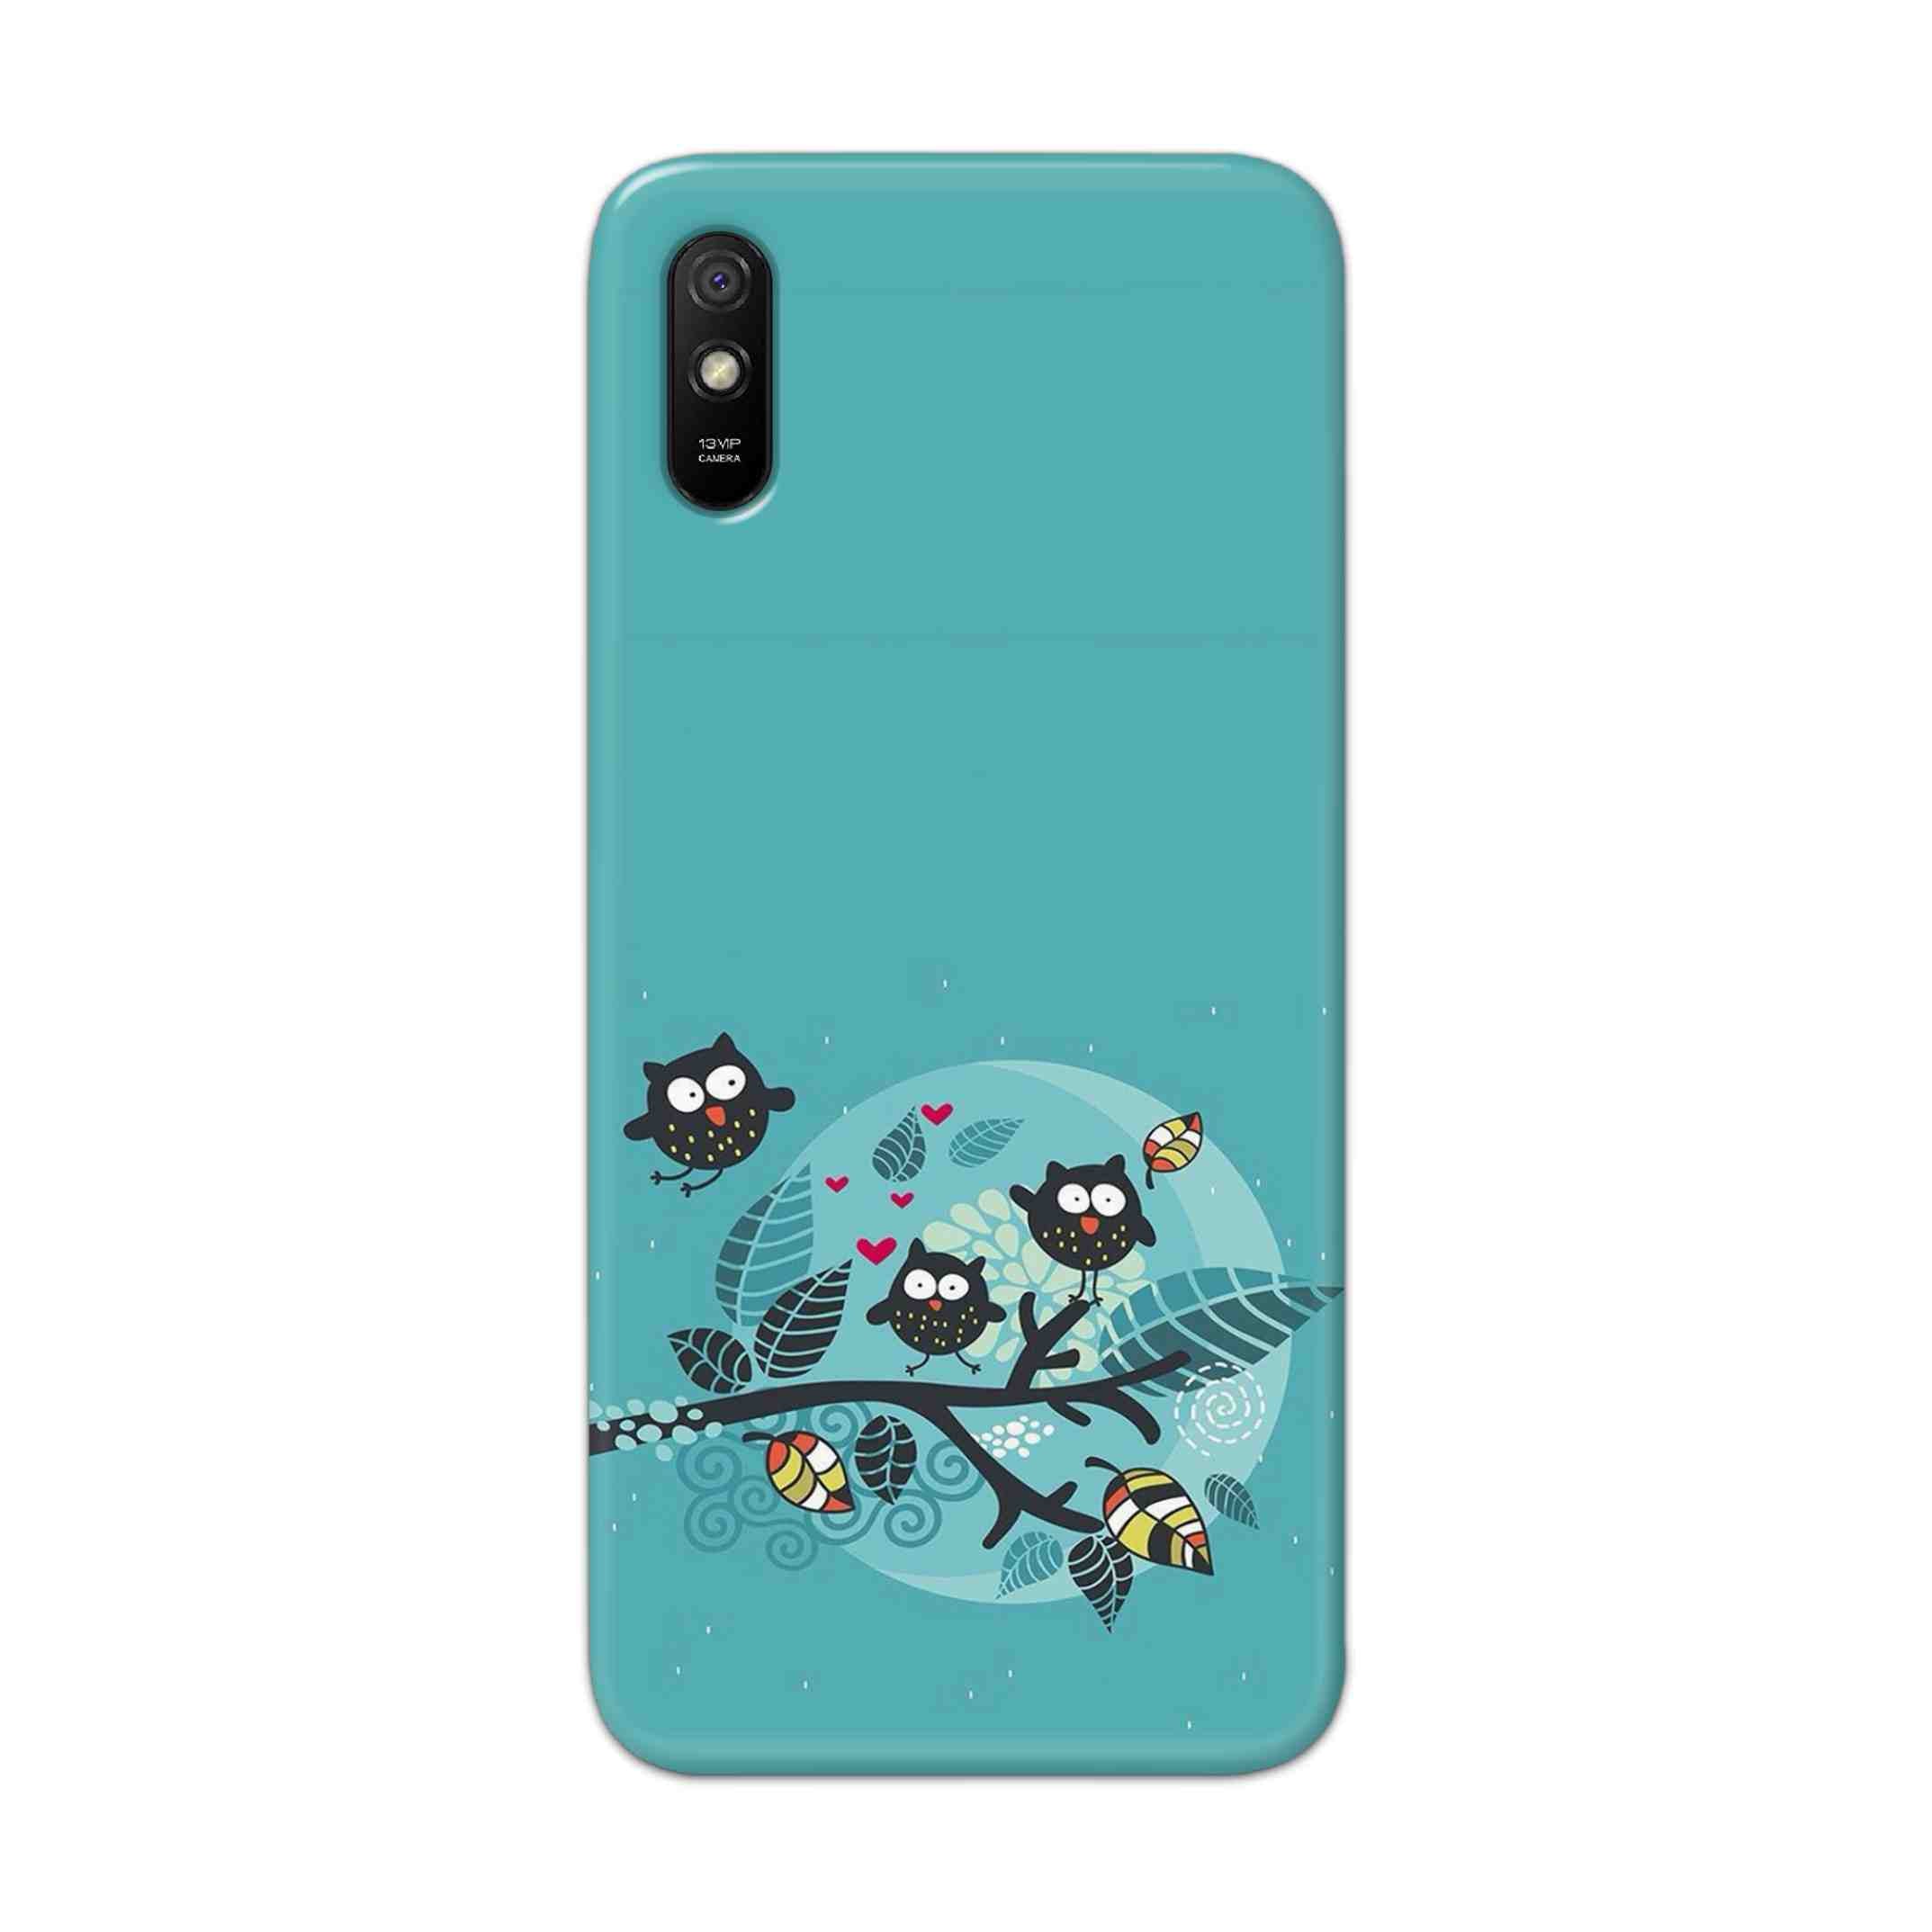 Buy Owl Hard Back Mobile Phone Case Cover For Redmi 9A Online